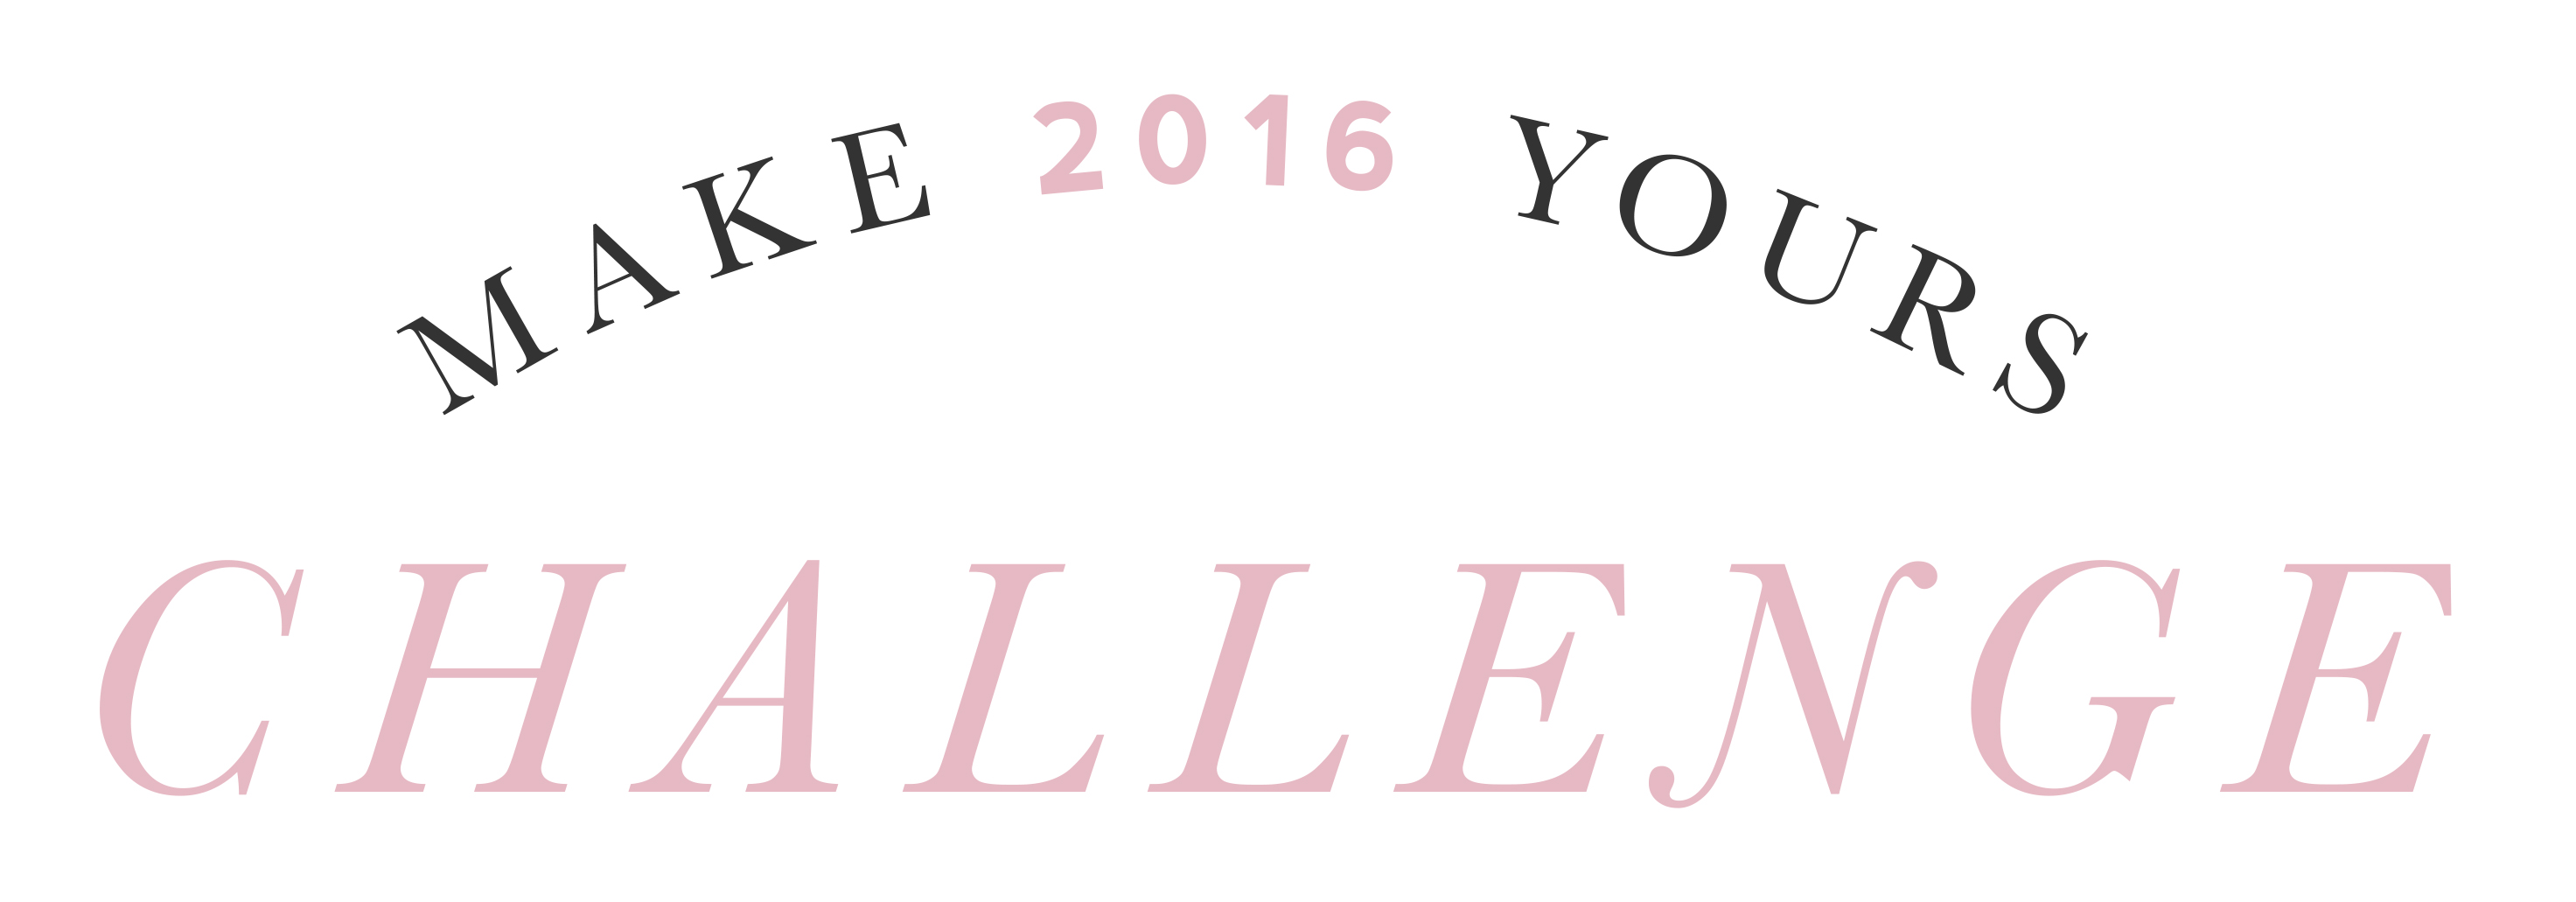 Make 2016 Yours challenge | Abby Grace